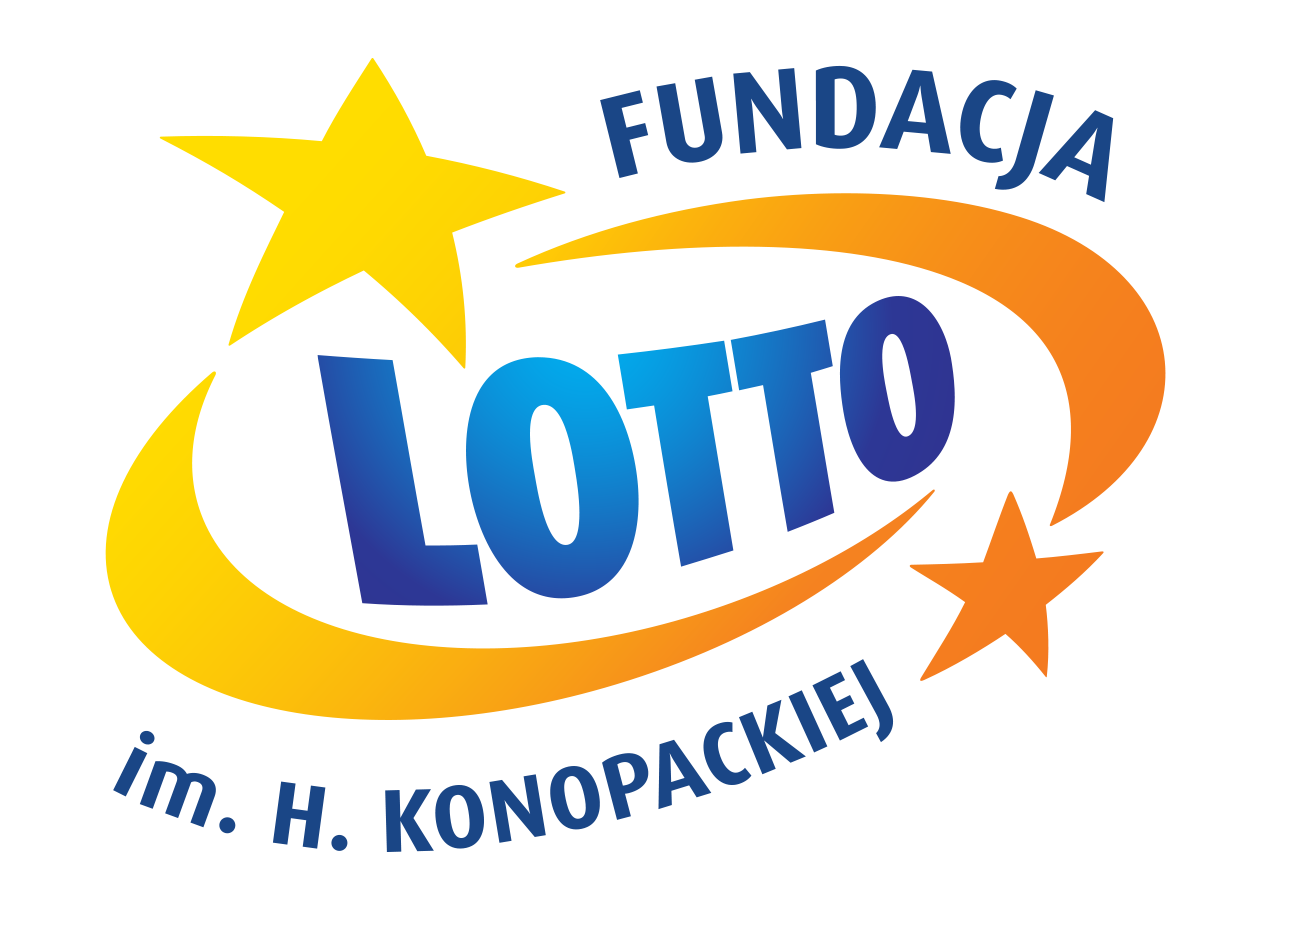 https://www.fundacjalotto.pl/wp-content/themes/fundacjalotto/assets/zdj/logo-fundacja/logo-fundacja-lotto-png.png